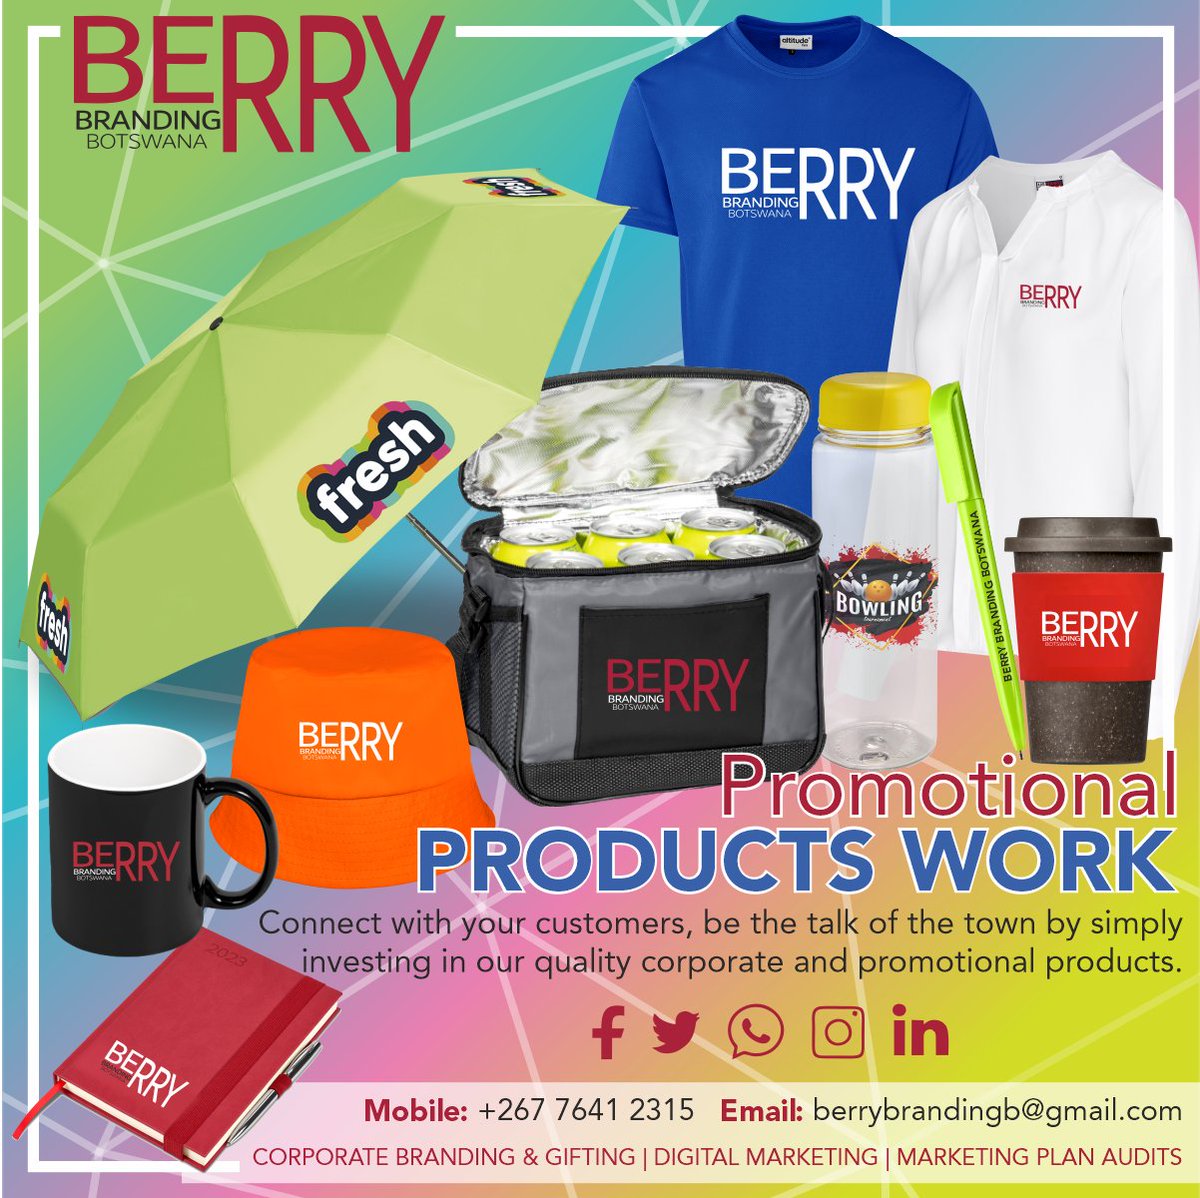 Start this new season by   CONNECTING with your CUSTOMERS & EMPLOYEES!!!!! 

Invest NOW in  memorable, fun and Functional corporate gifts & Clothing!!!

#NewYear #2023PlansInMotion #BrandedGifts #marketplace #merchandise #pushabw #gifts #promogiveaway